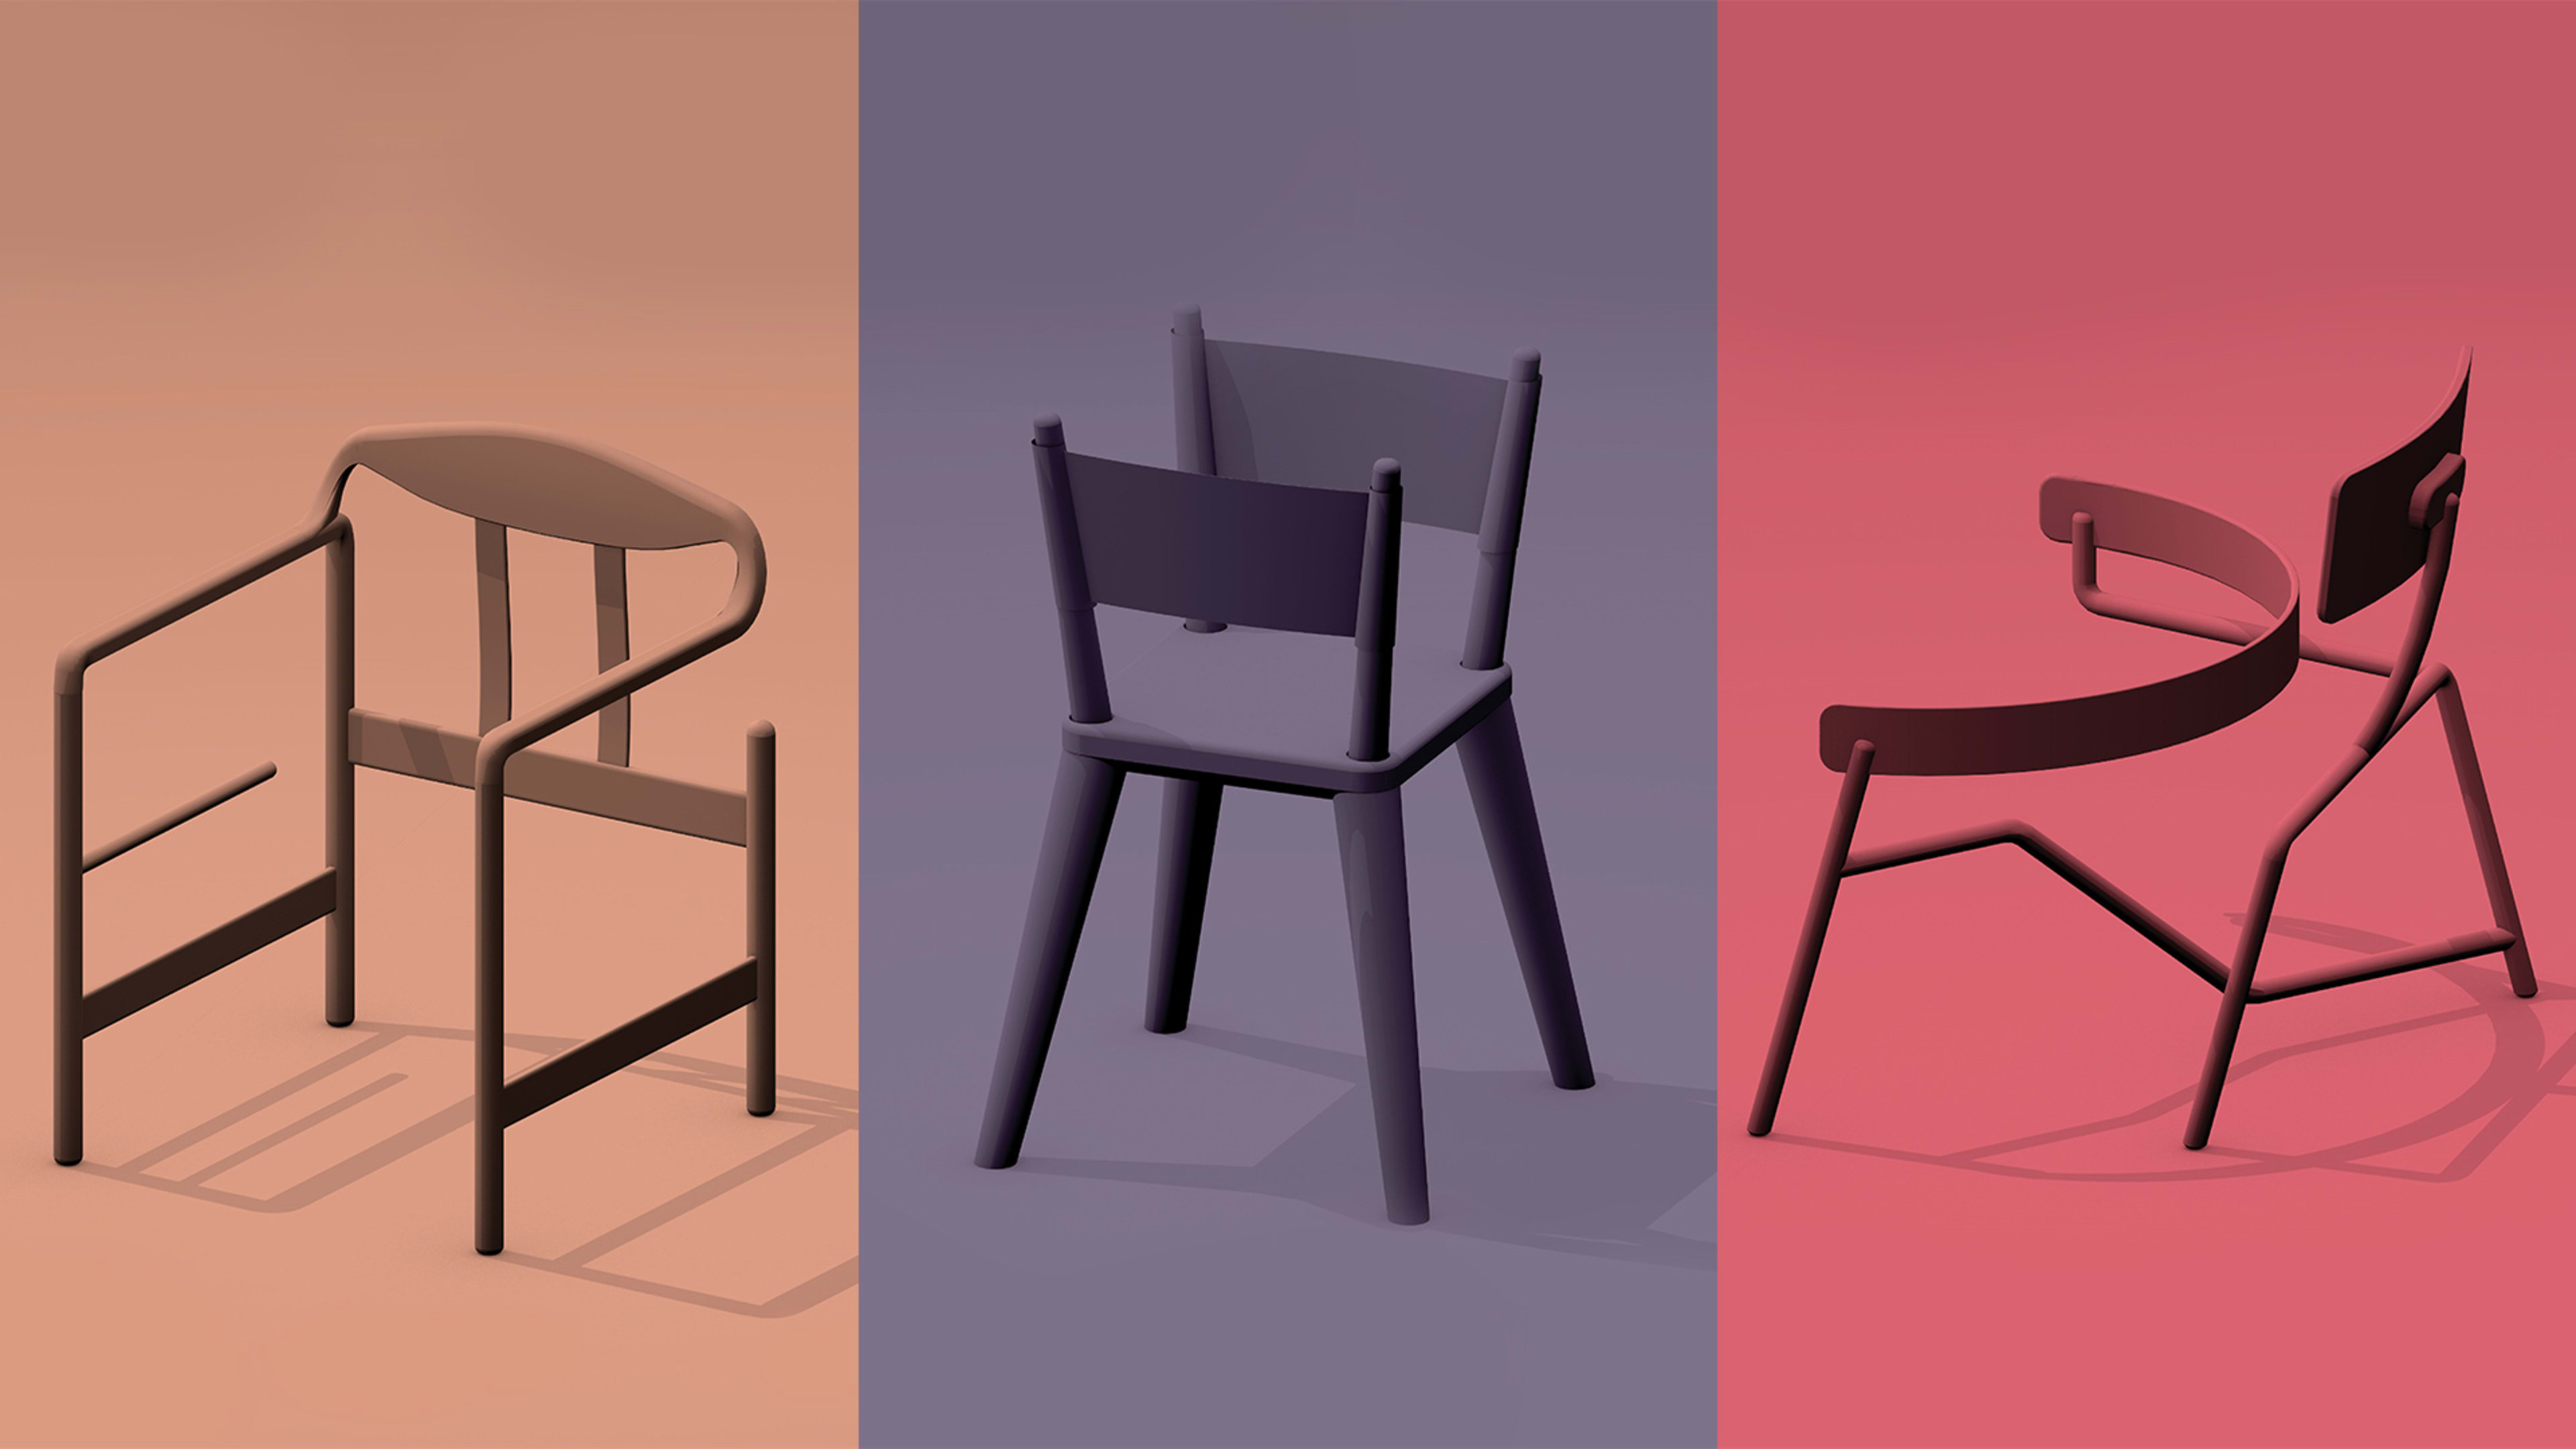 These chairs were designed by an AI bot, and they’re surprisingly good